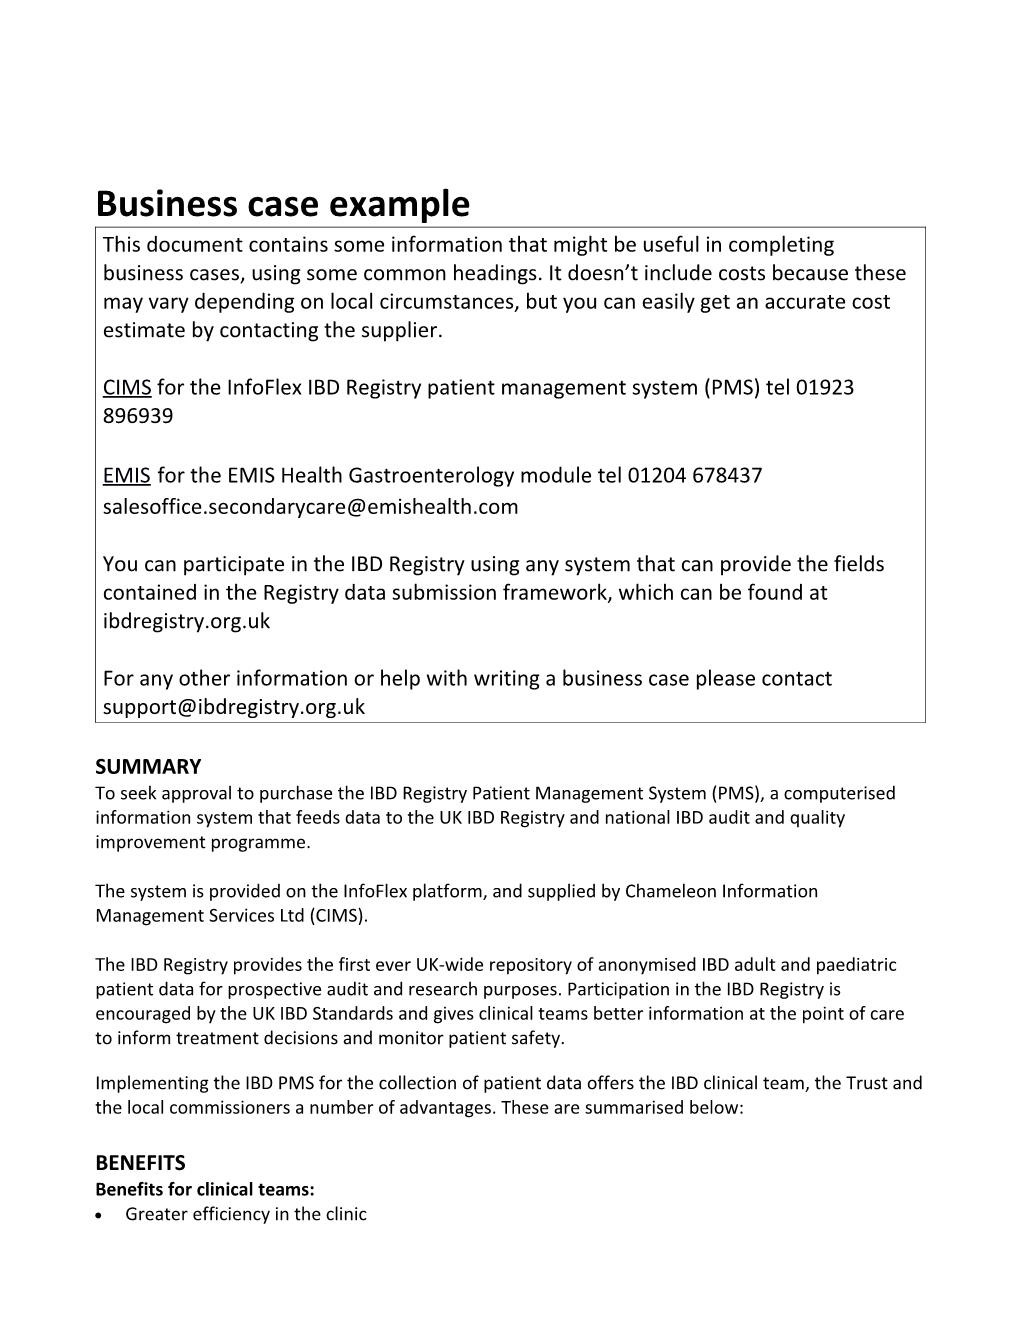 Business Case Example